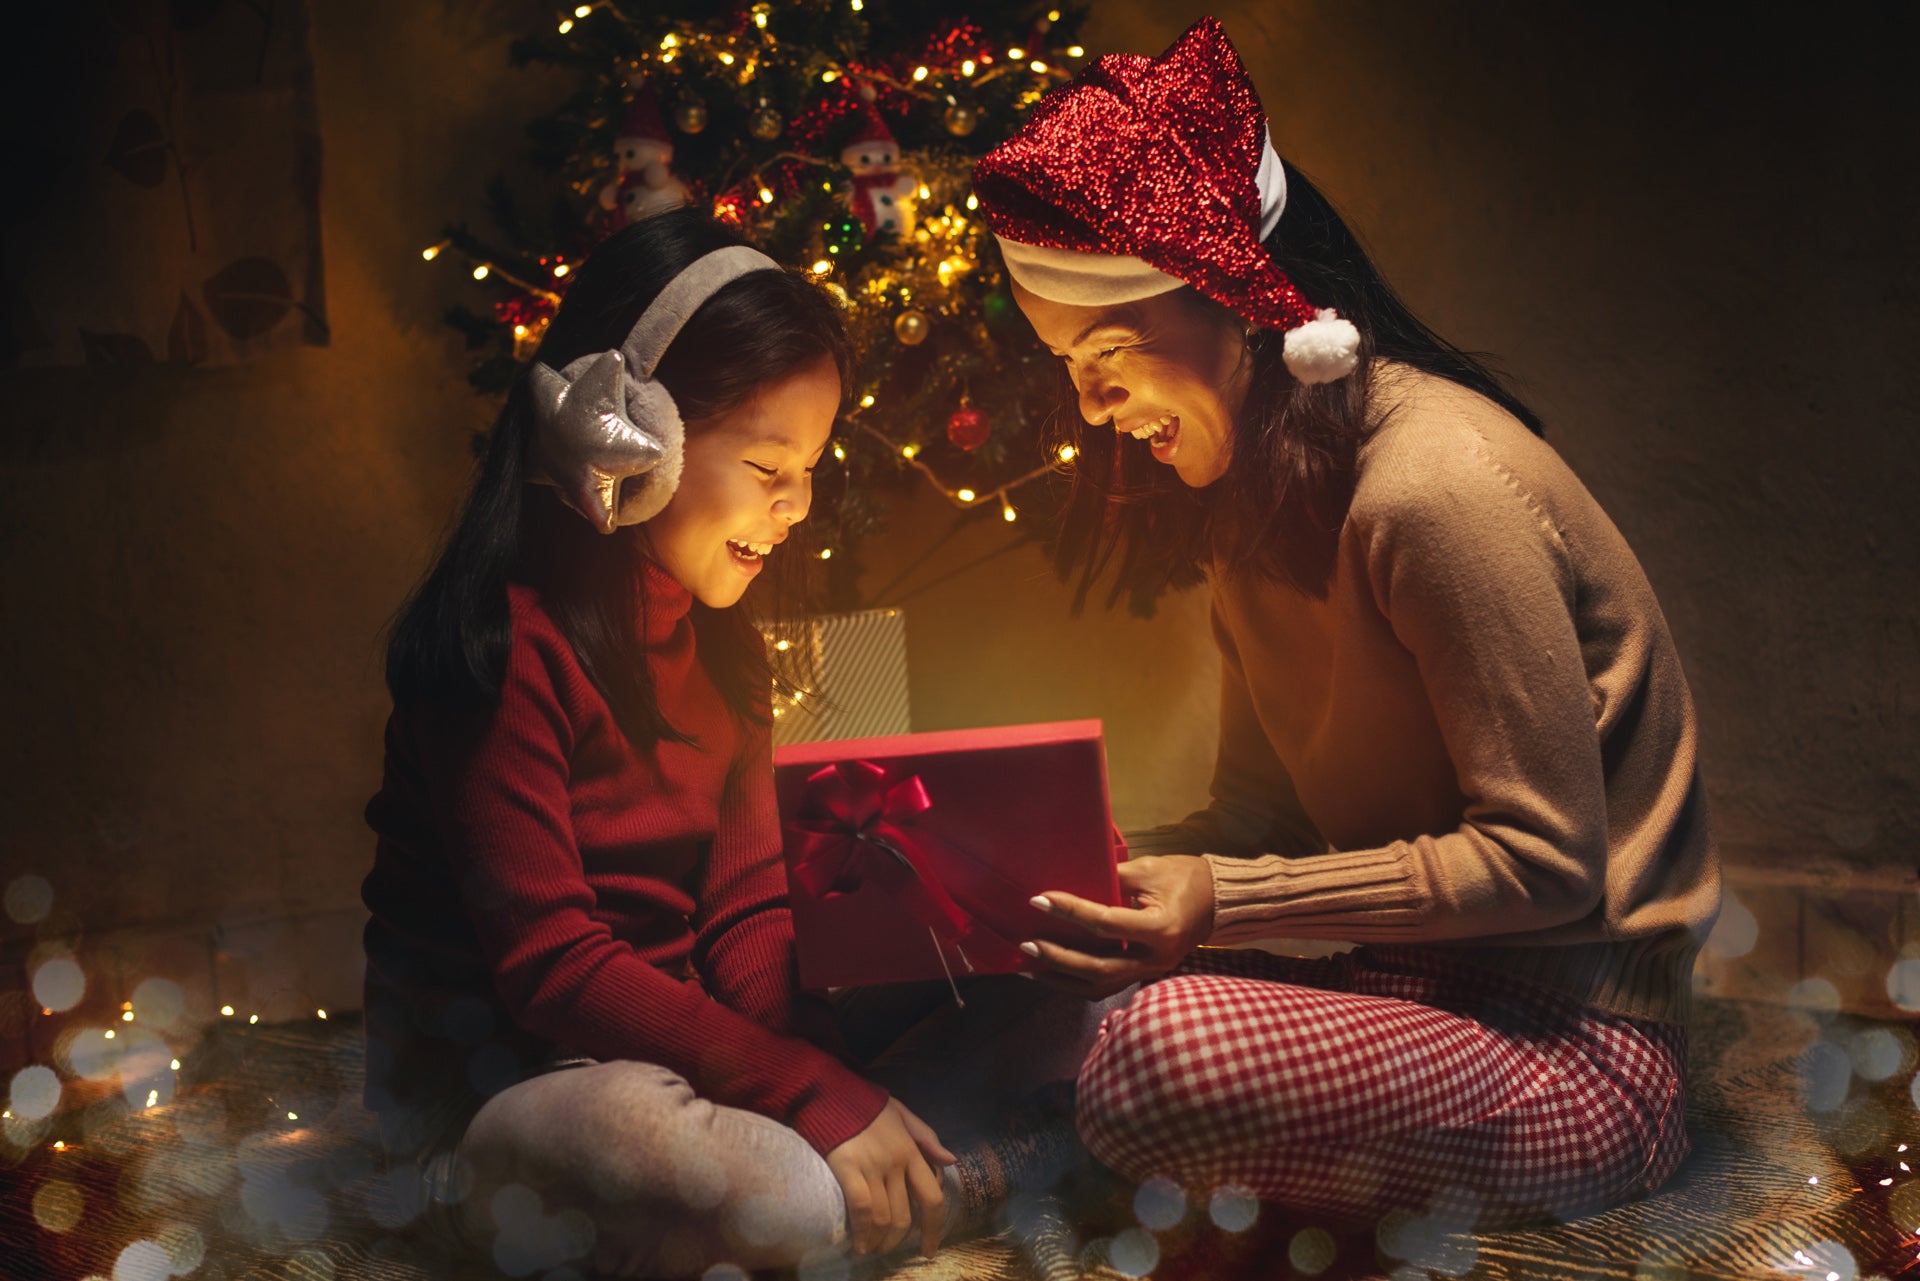 Unique Christmas gift ideas for kids beyond toys